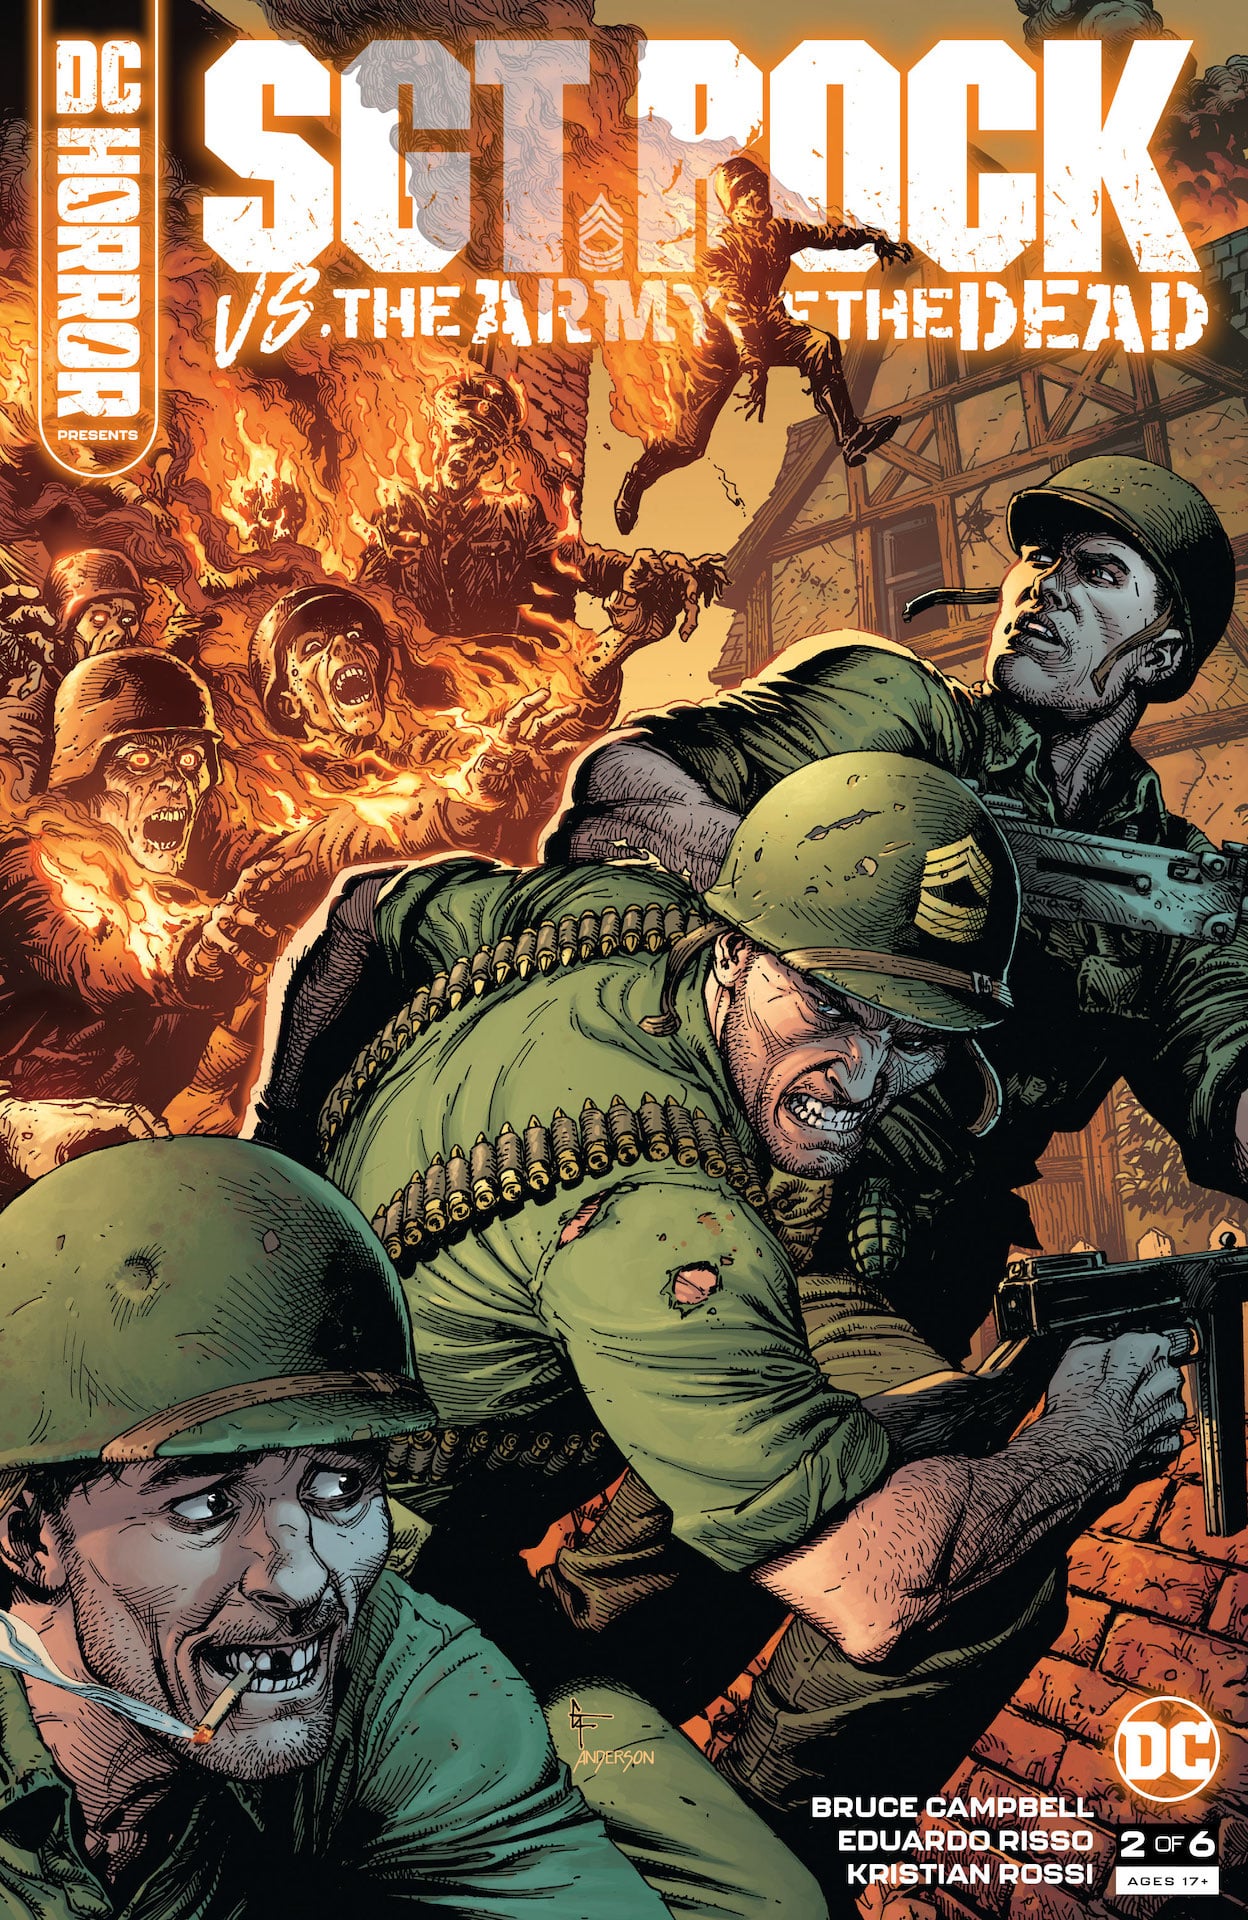 DC Preview: DC Horror Presents: Sgt. Rock vs. The Army of the Dead #2